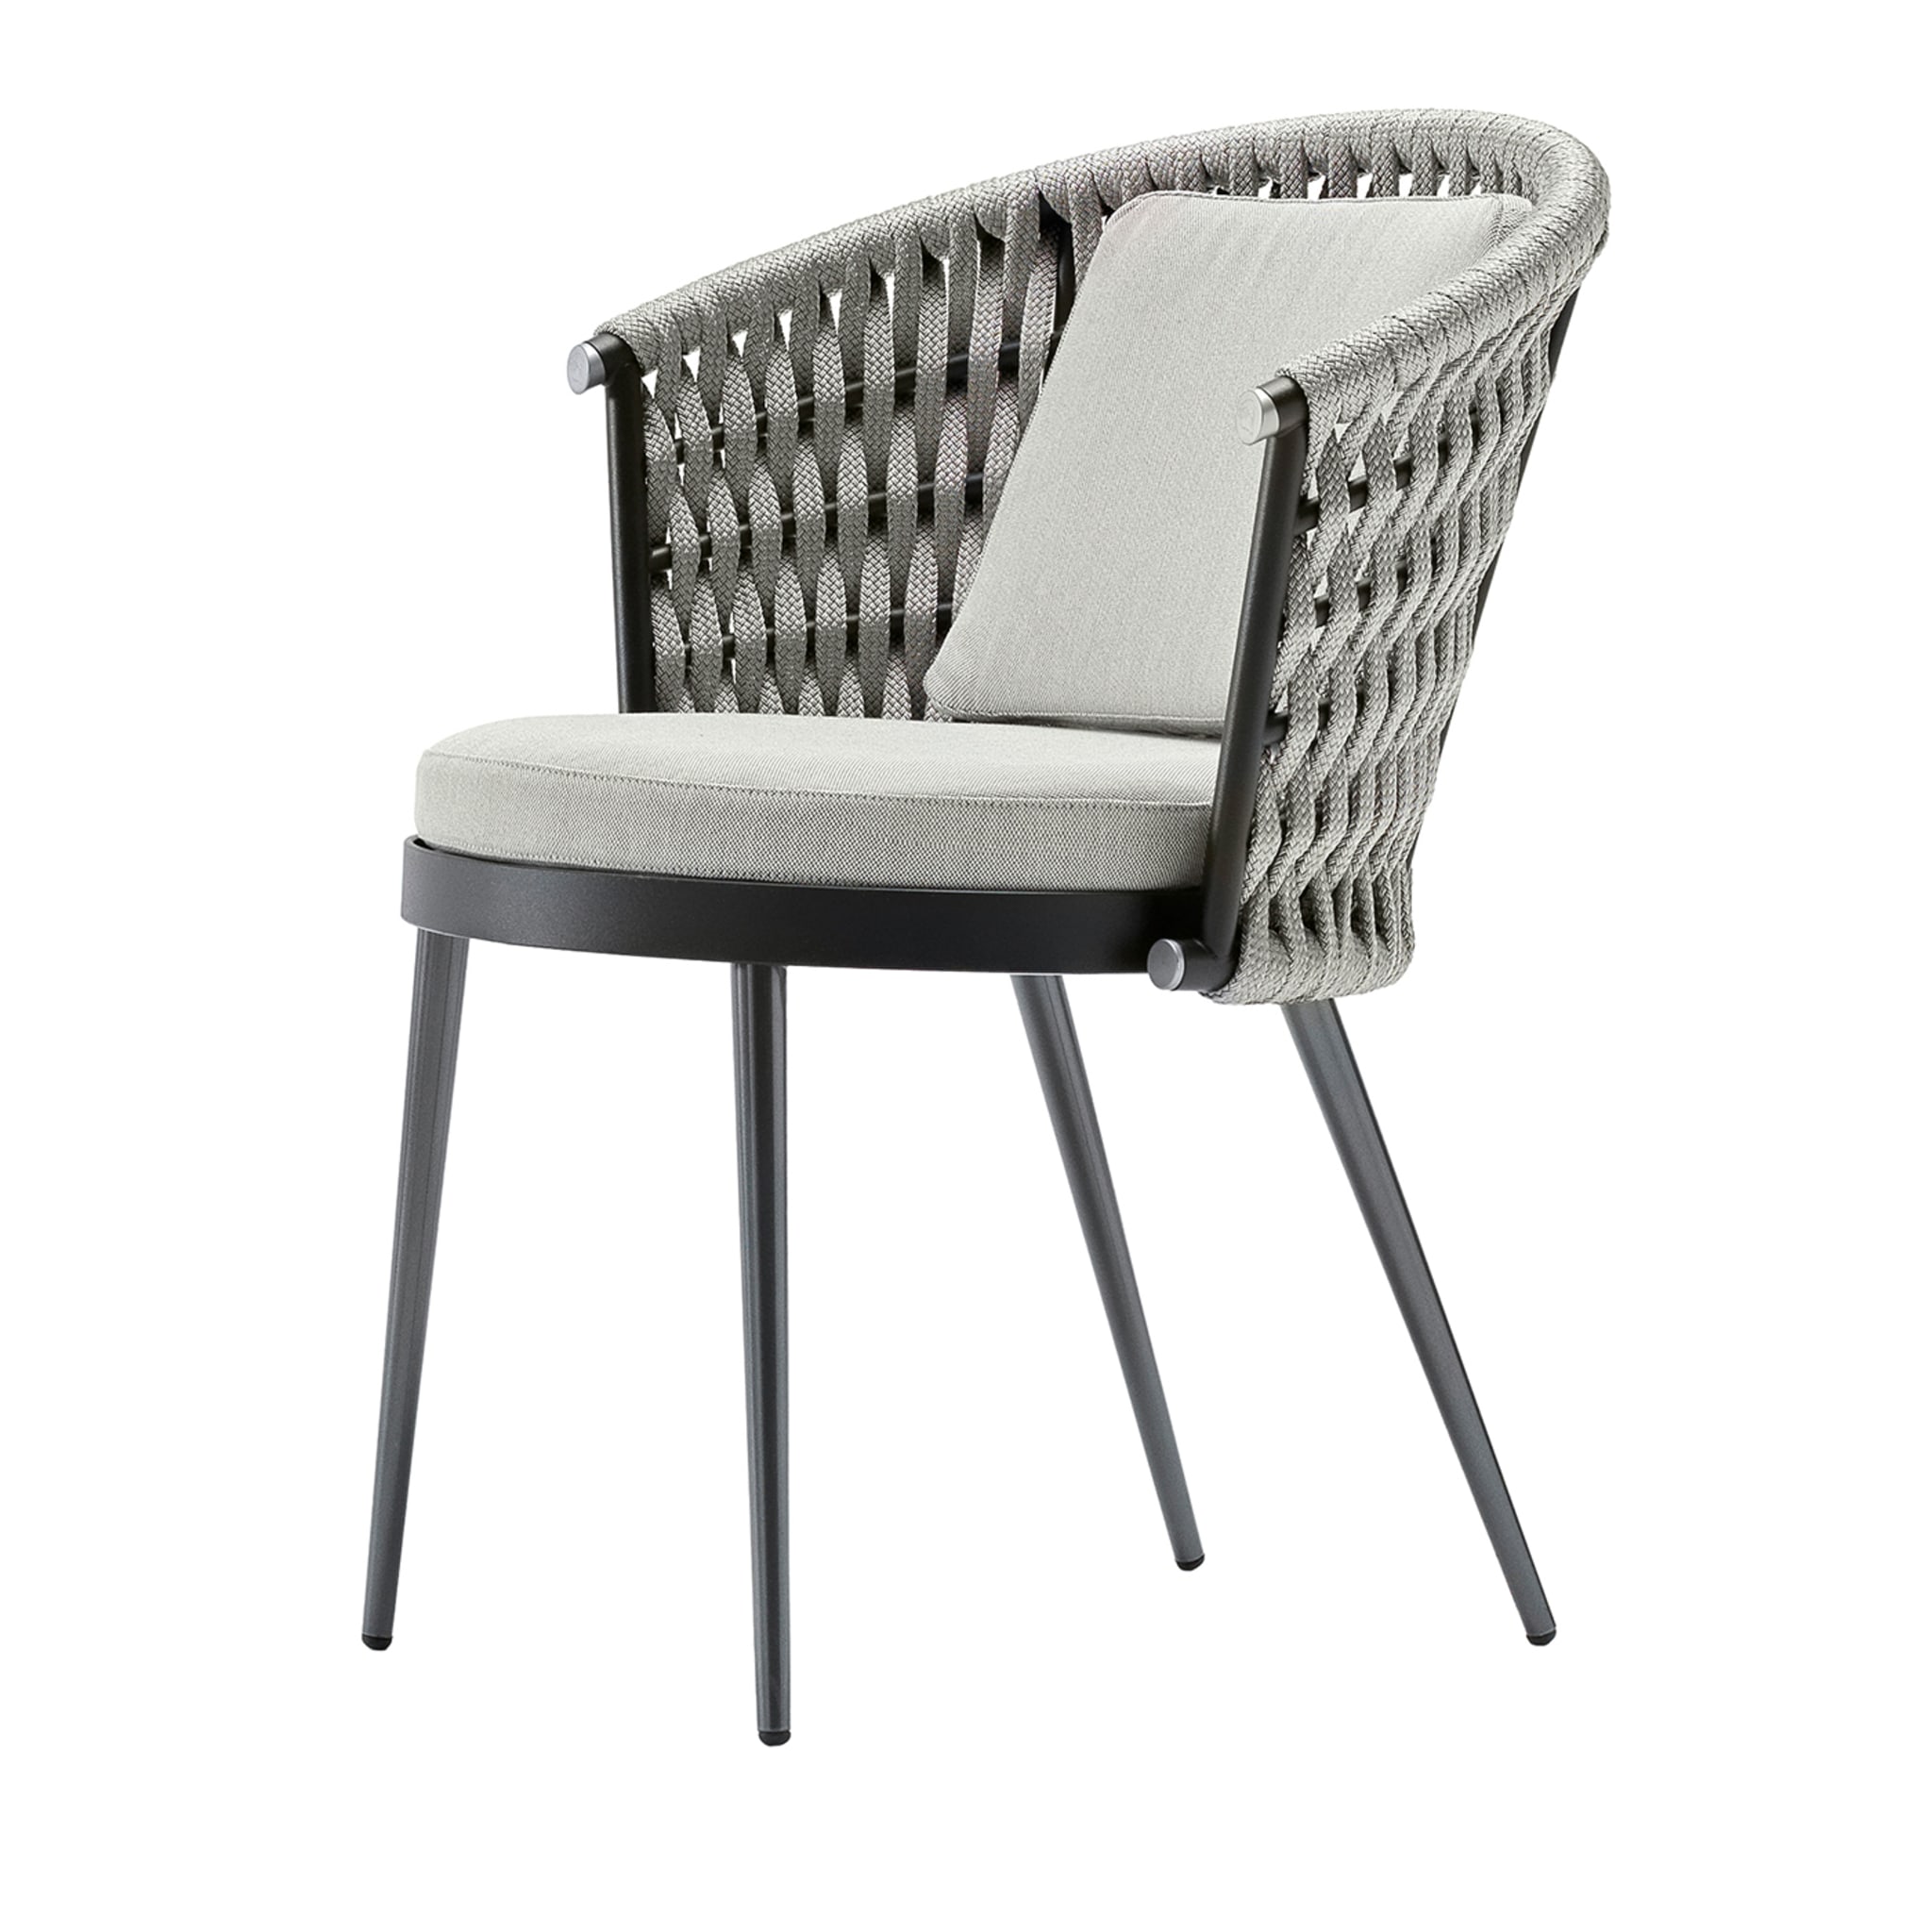 Gray Outdoor fabric Chair with cushion - Main view